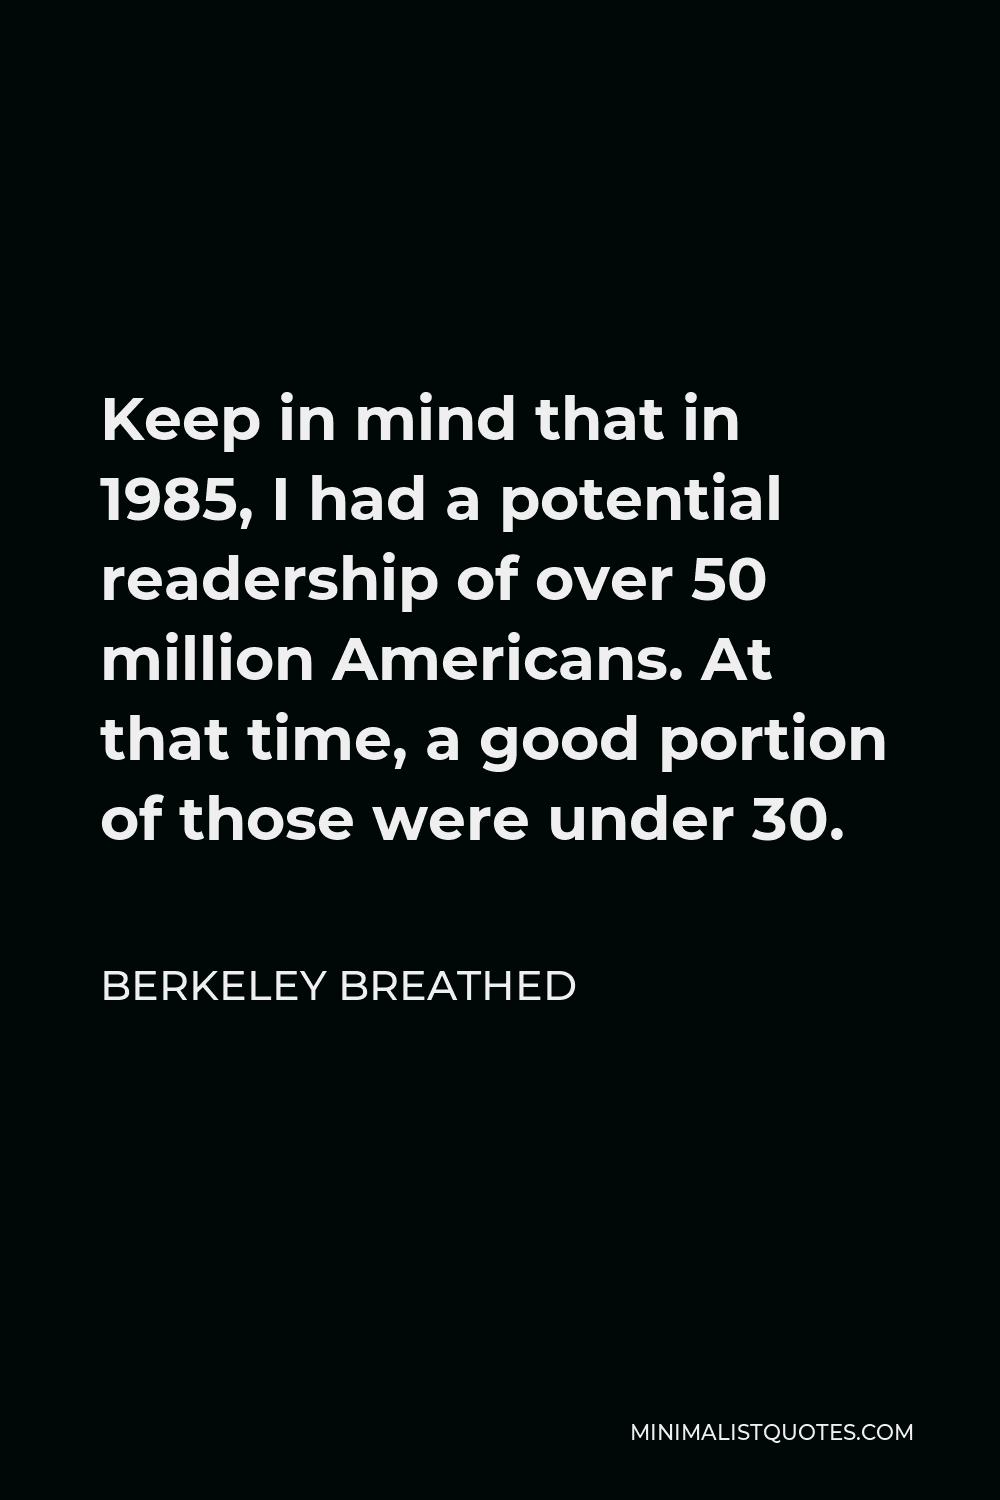 Berkeley Breathed Quote - Keep in mind that in 1985, I had a potential readership of over 50 million Americans. At that time, a good portion of those were under 30.